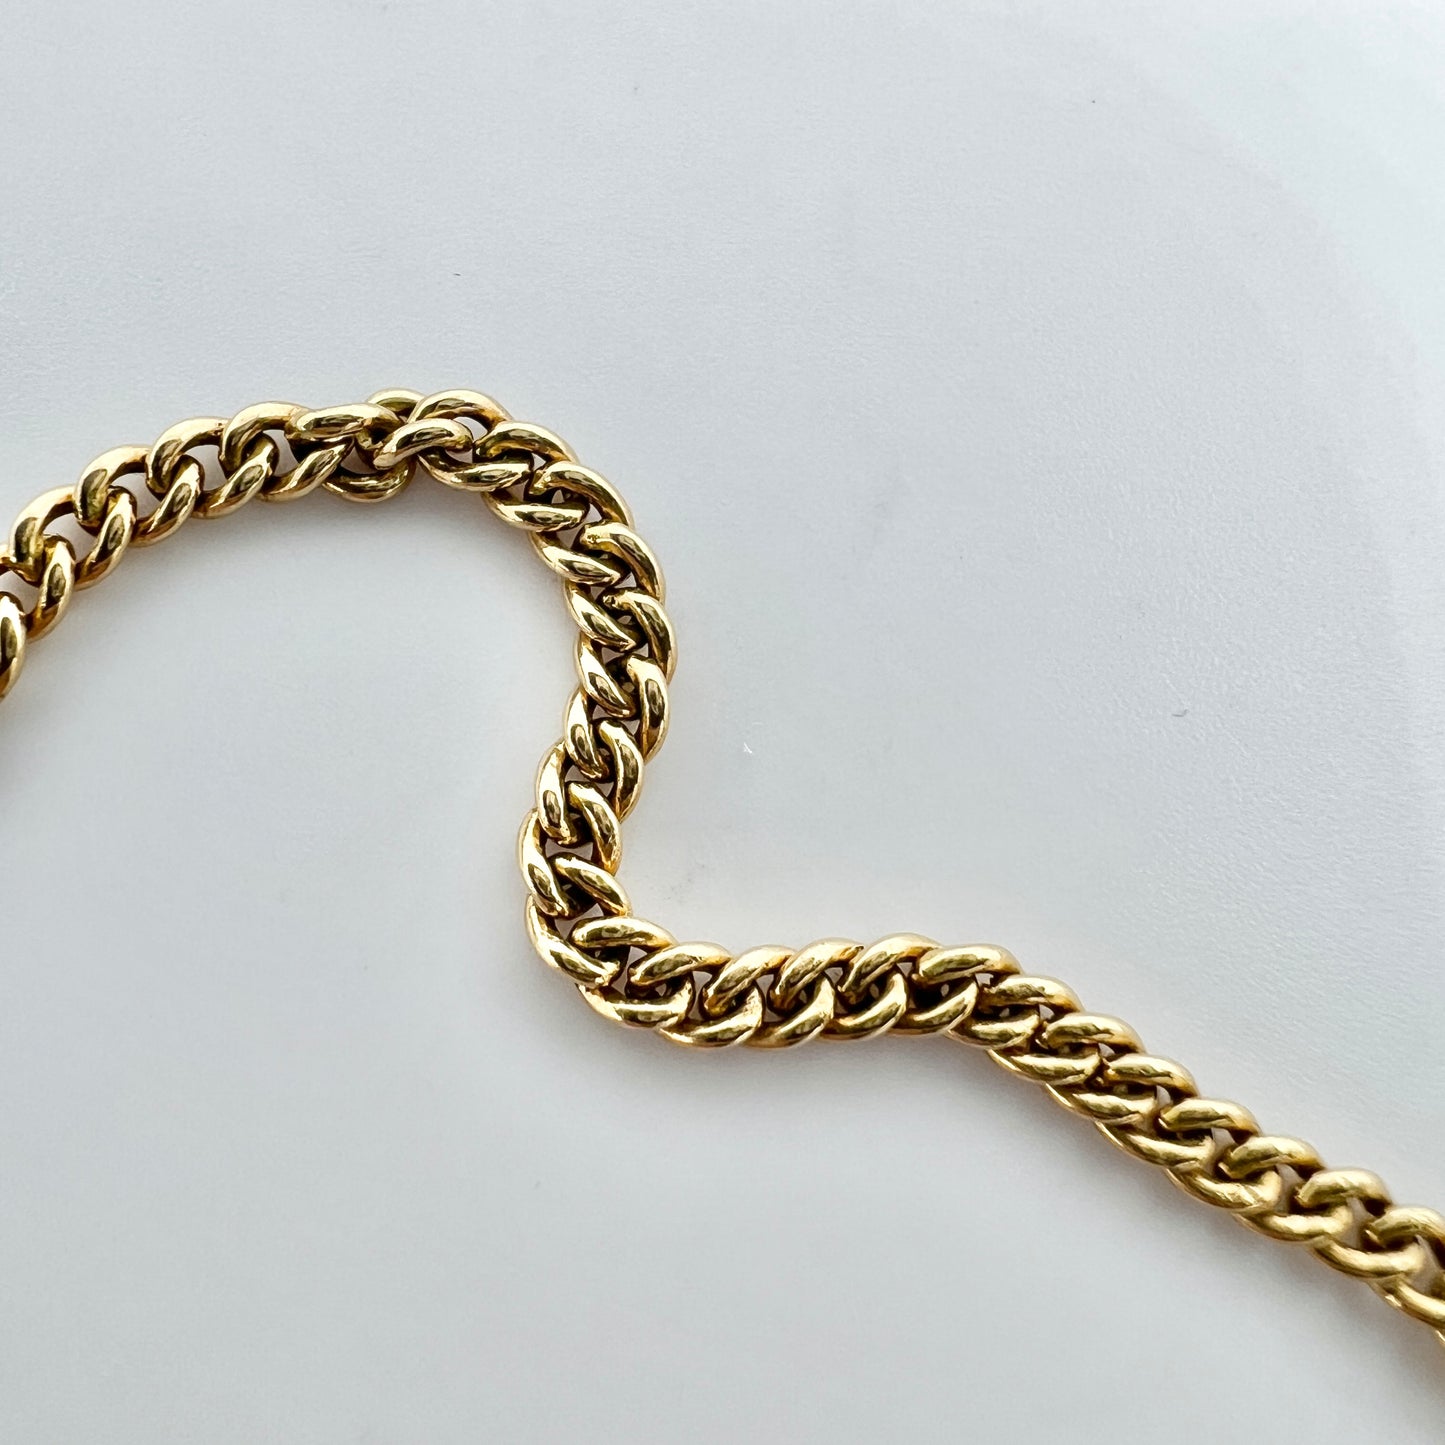 Sweden c 1900. Antique 18k Gold Watch Chain in Perfect Necklace Length.